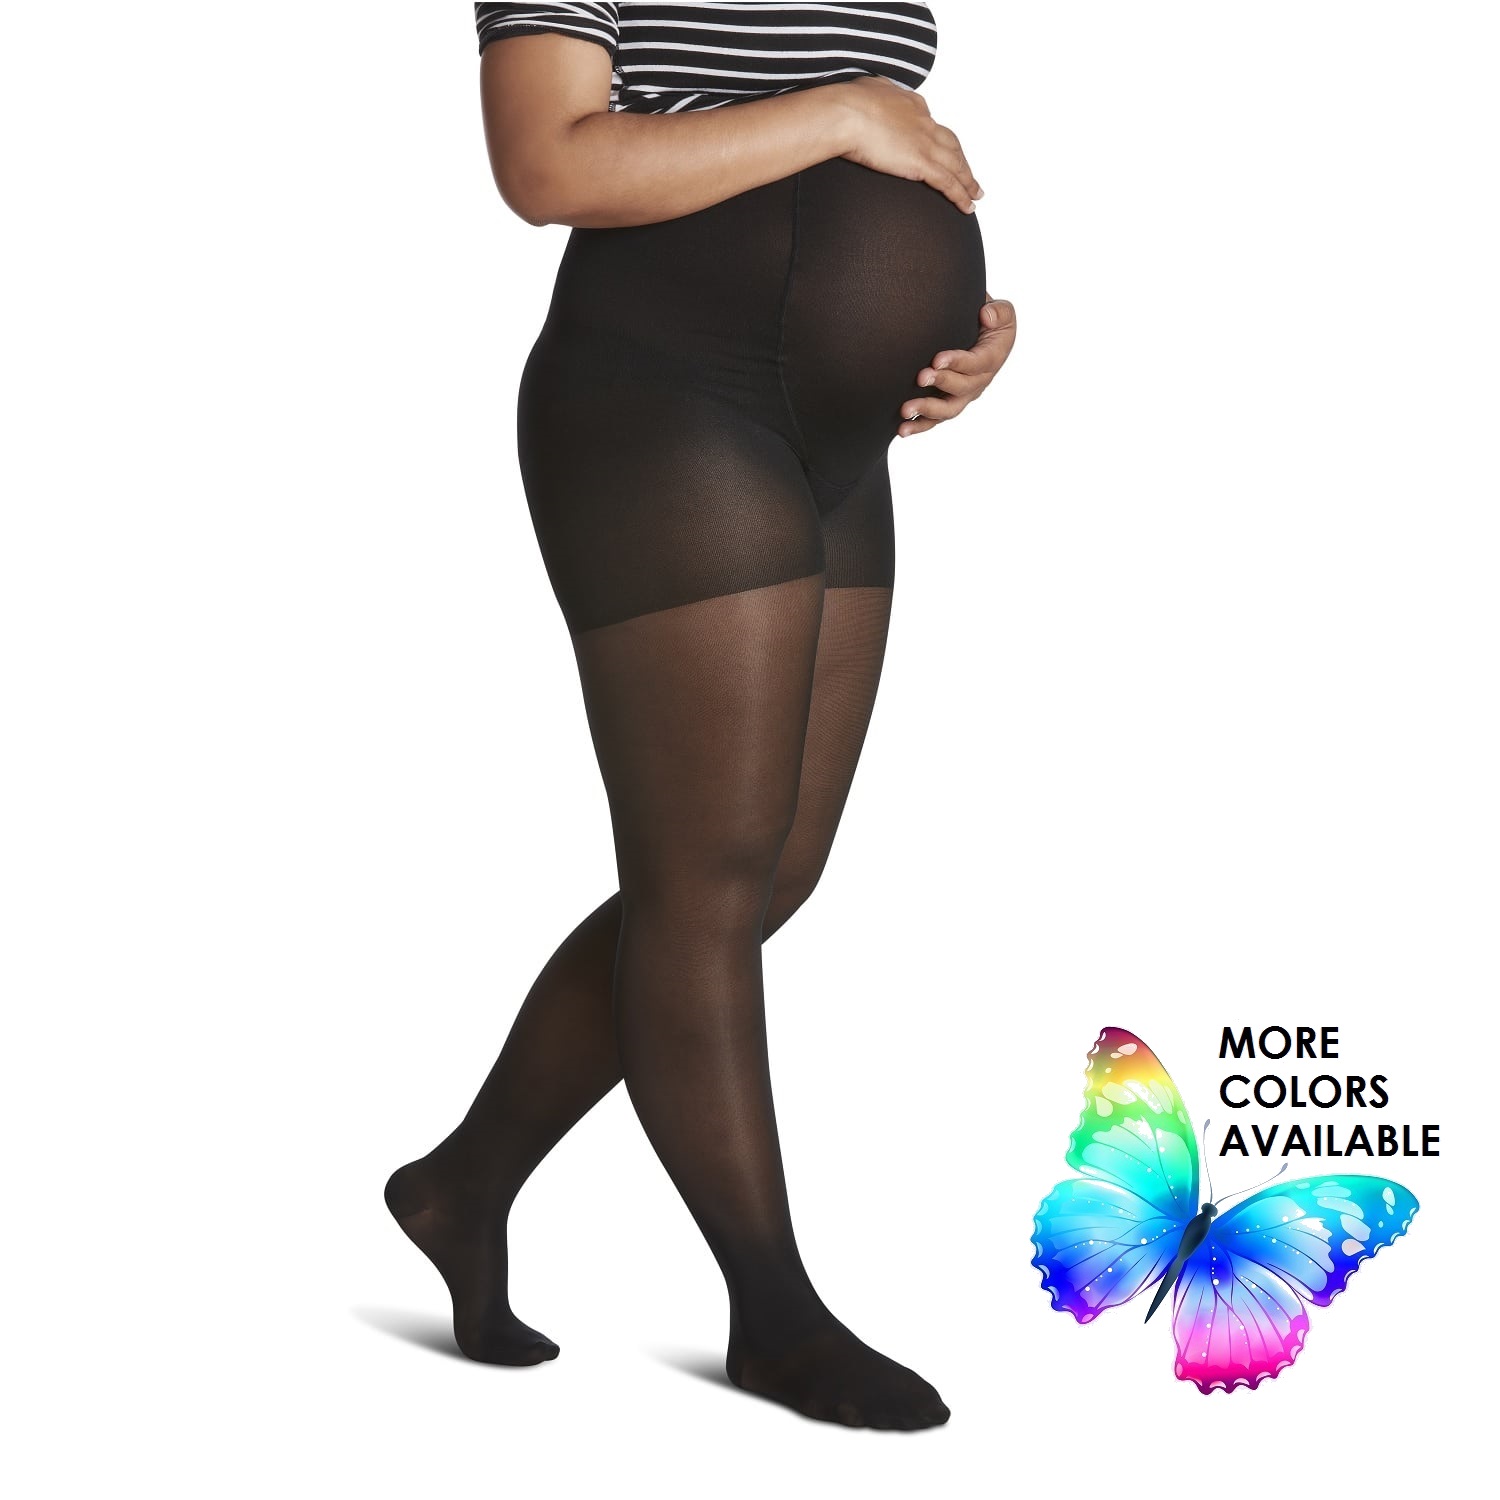 Maternity Compression Stockings, - Buy Taiwan Wholesale Maternity  Compression Stockings